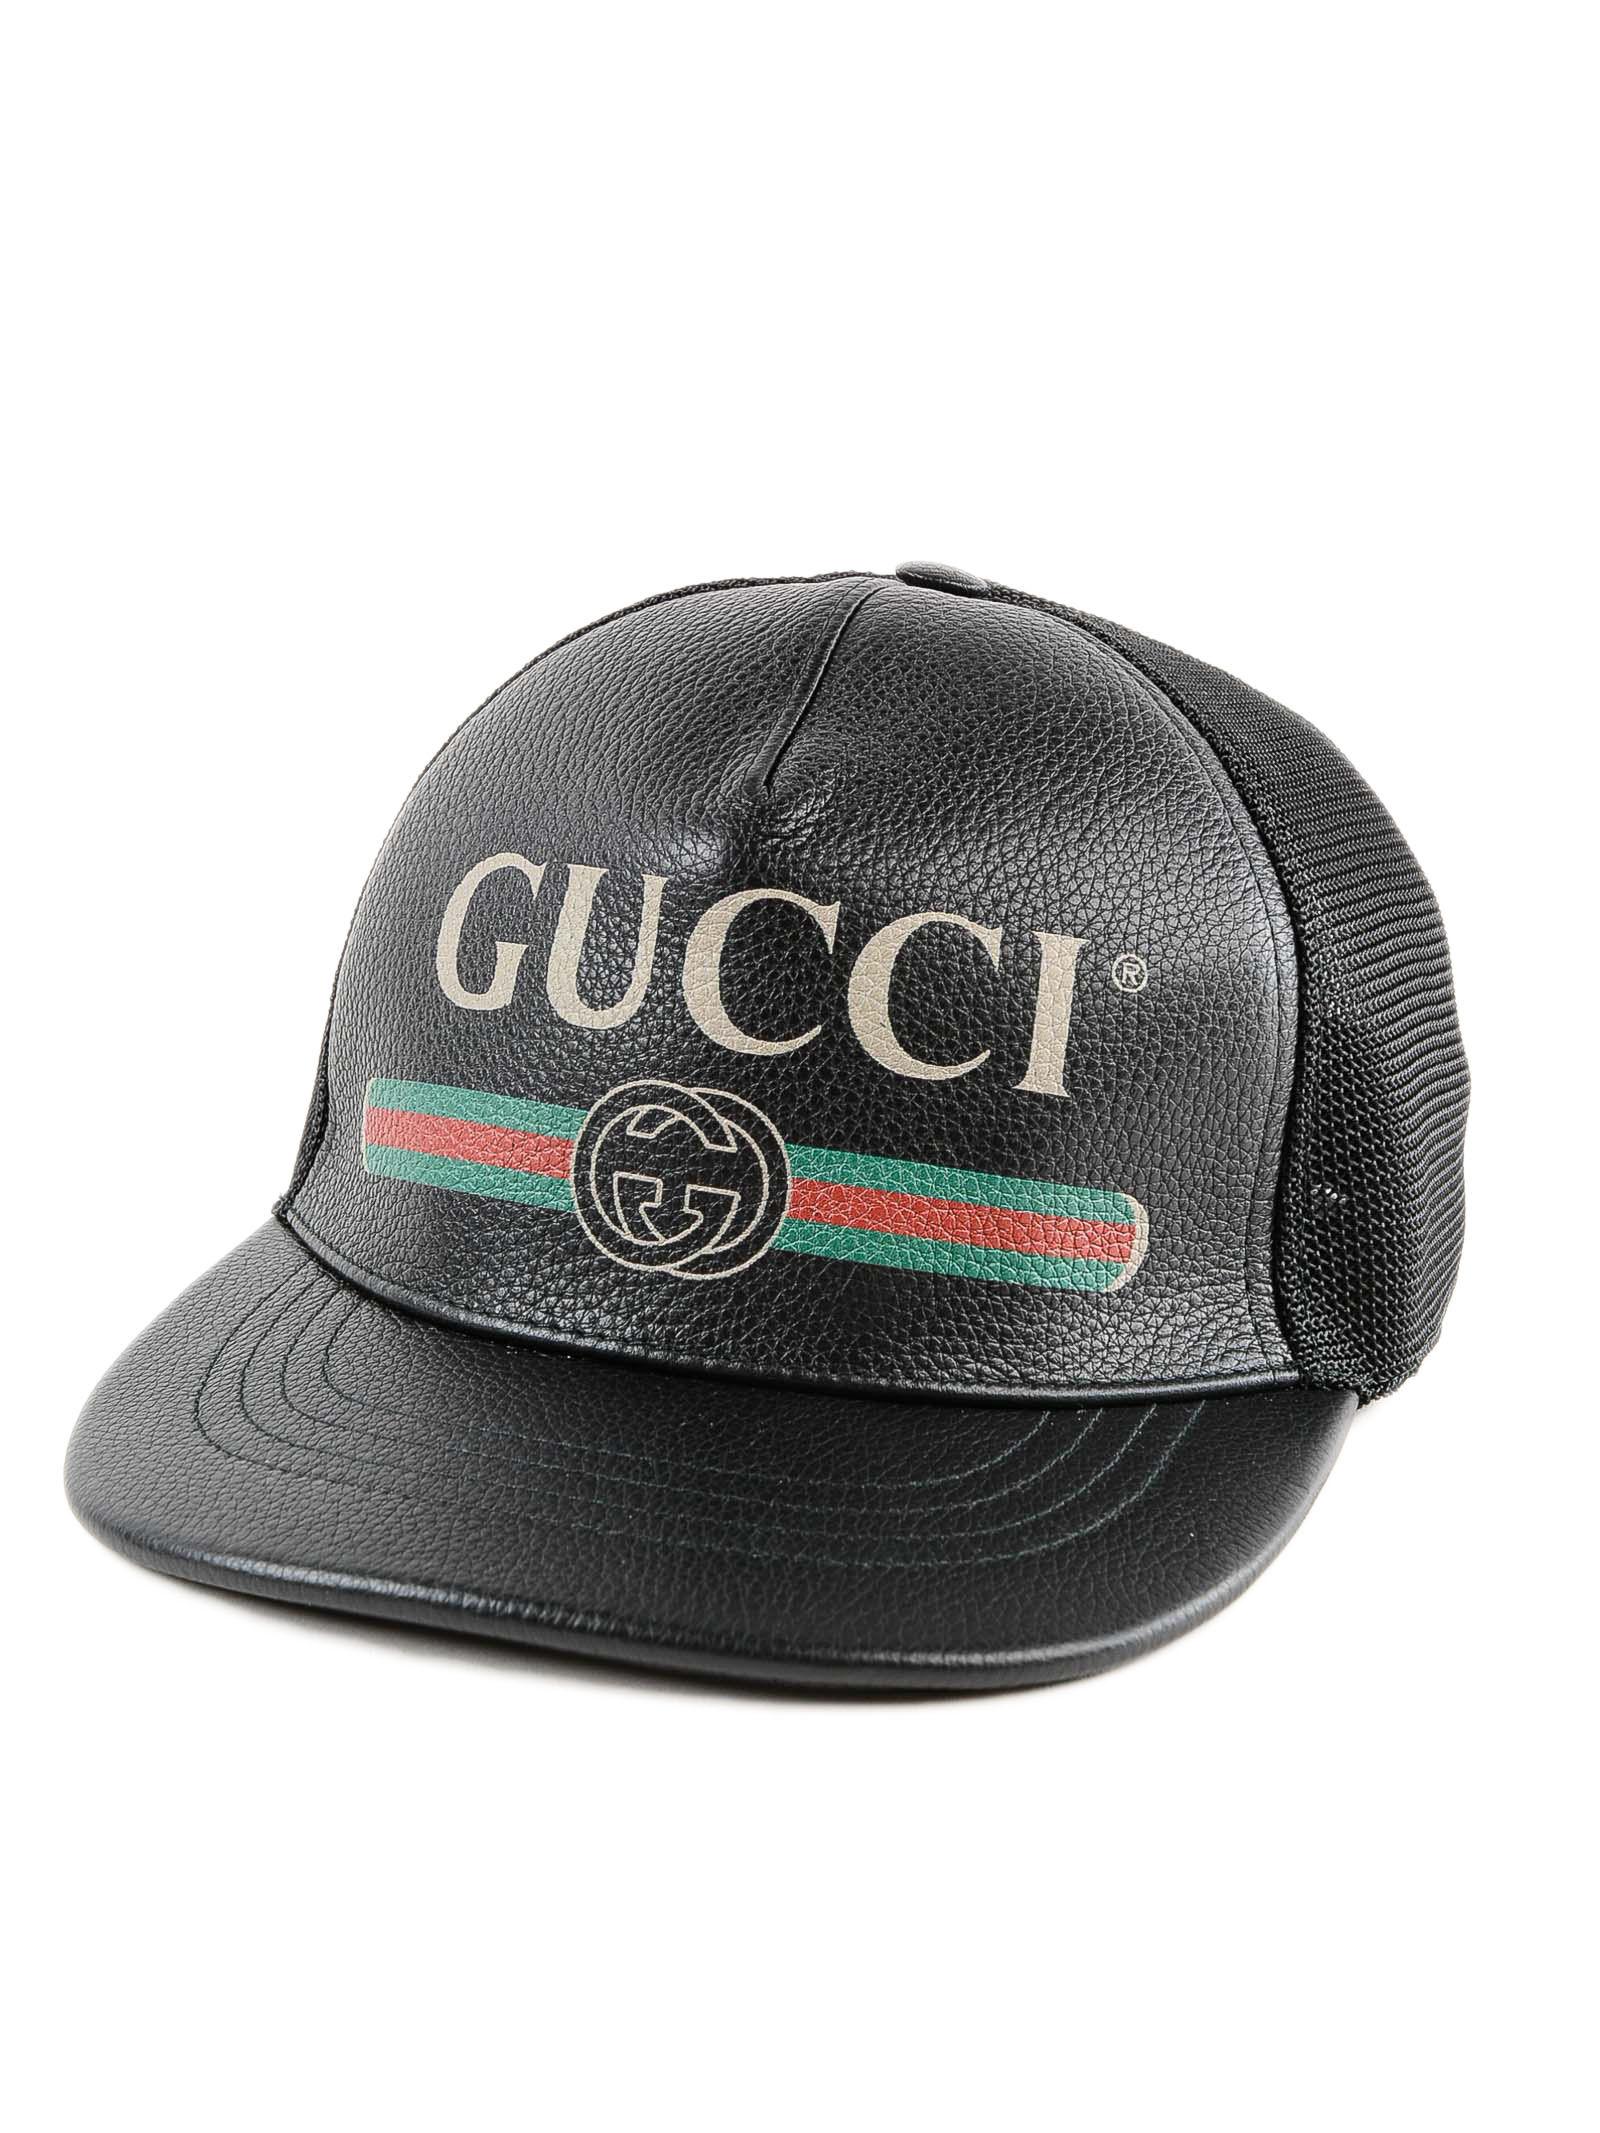 Gucci Leather Fake Print Baseball Hat in Black for Men - Lyst